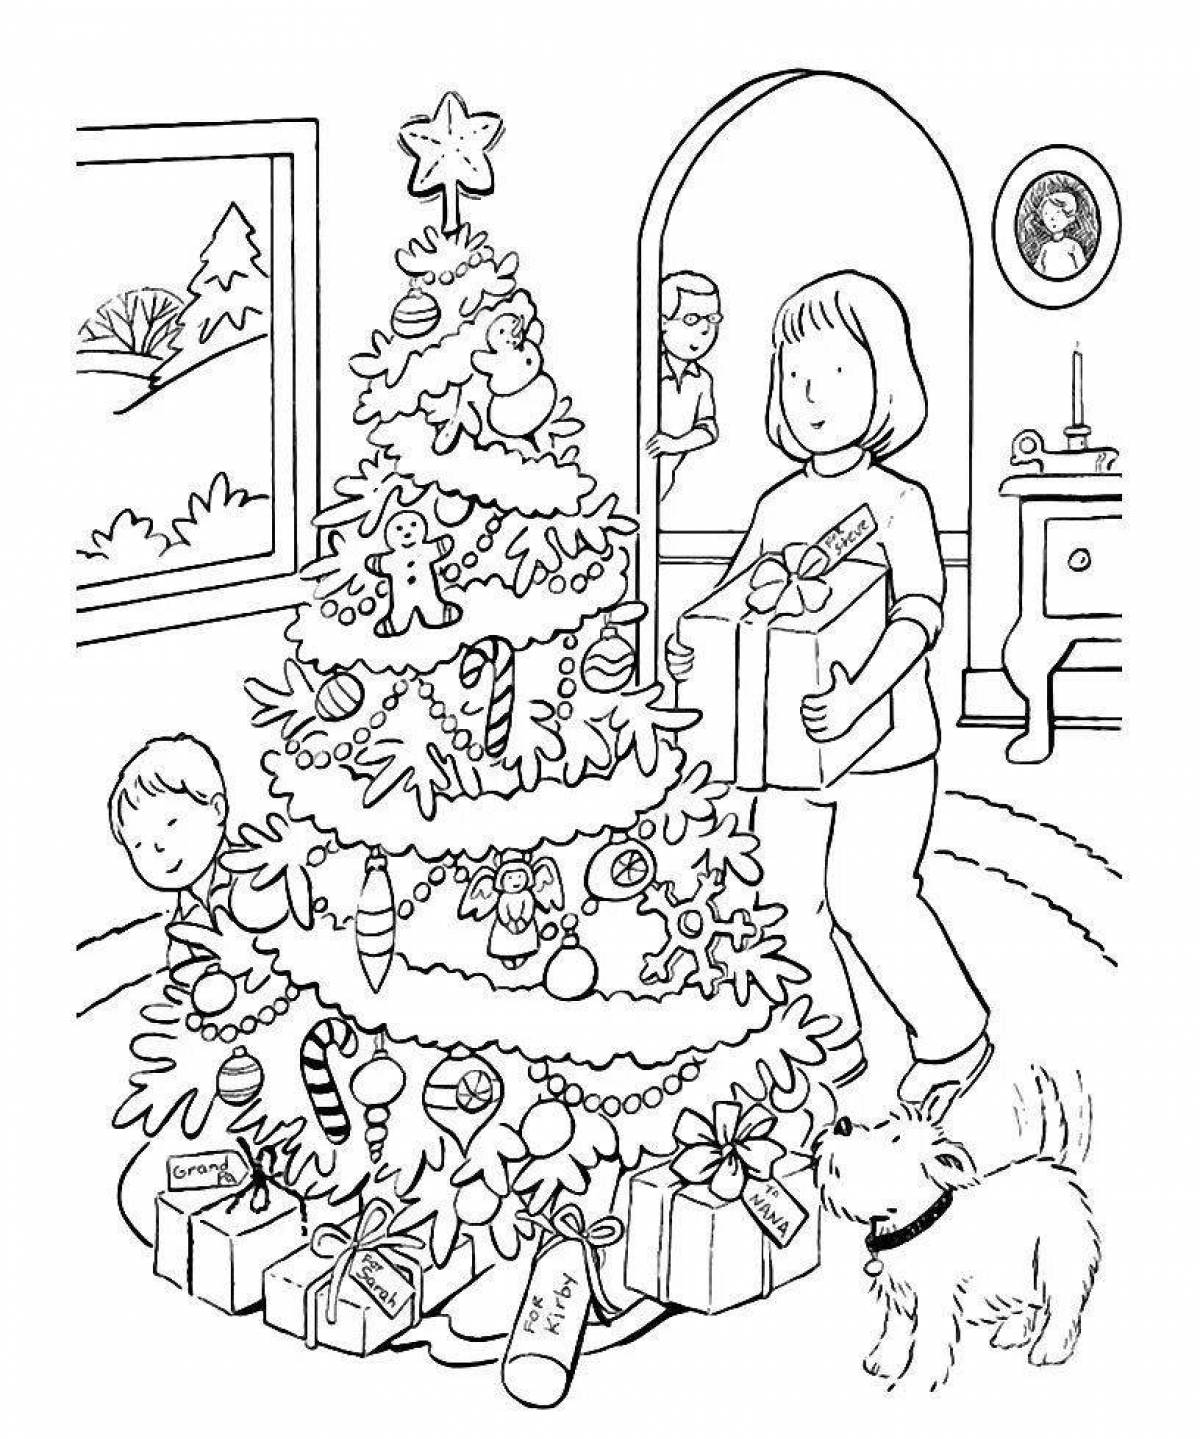 Fascinating Christmas family coloring book